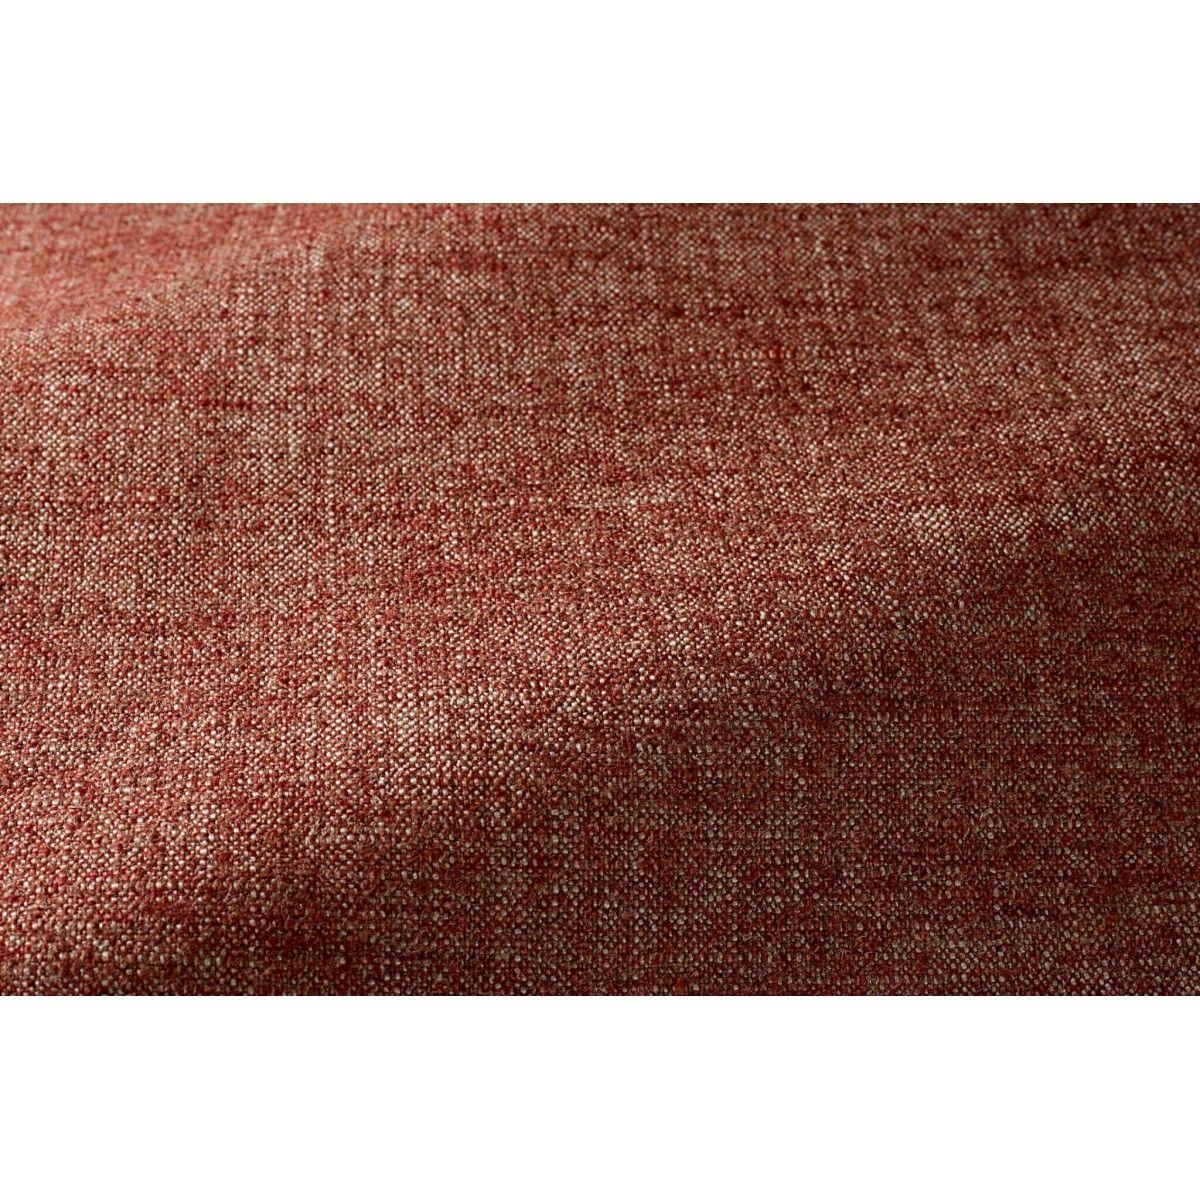 Popus Editions Giovanna 4 Seater Sofa in Marrakesh London Linen Fabric

Giovanna is a sofa with a strong profile. A sober, plush line, with this famous detail that changes everything, so as not to forget its strength of character and this charming